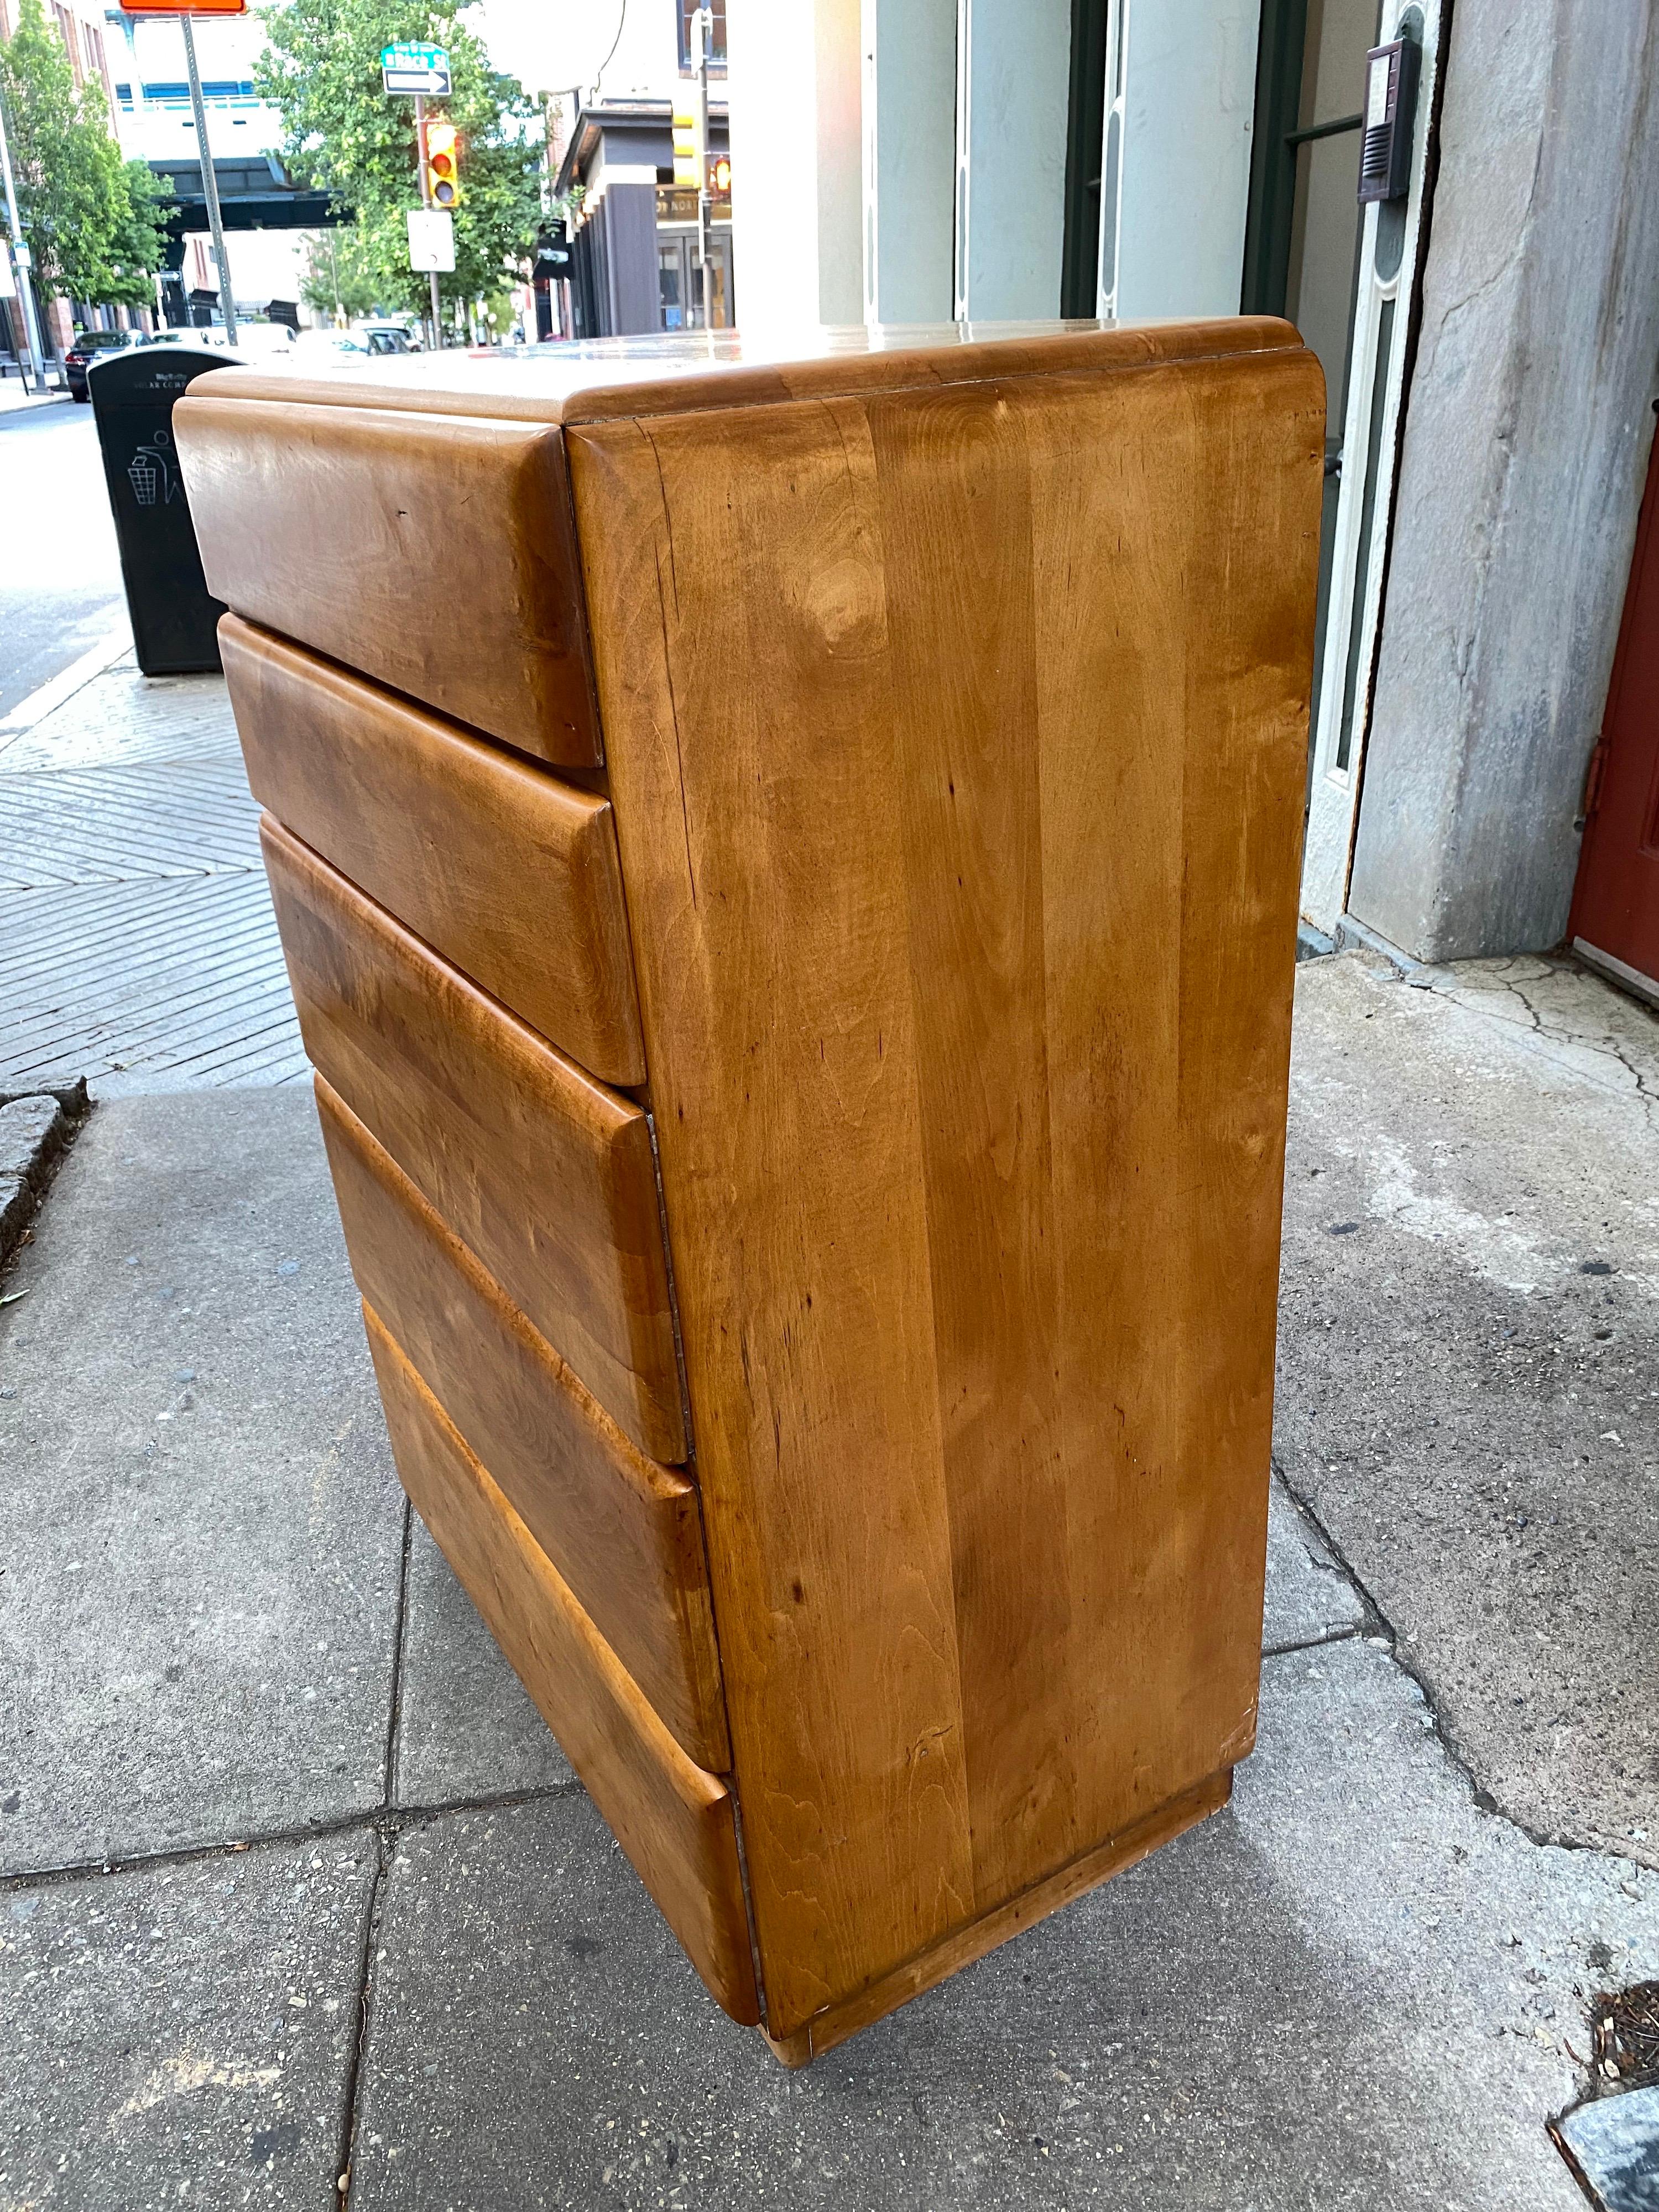 Russel Wright 5 drawer solid maple dresser. Dates to the early 1950’s, was said to be a line he did for Sears. Was refinished 15 years ago, still looks good but shows some flaws as seen in photos. A little white paint to the bottom where your